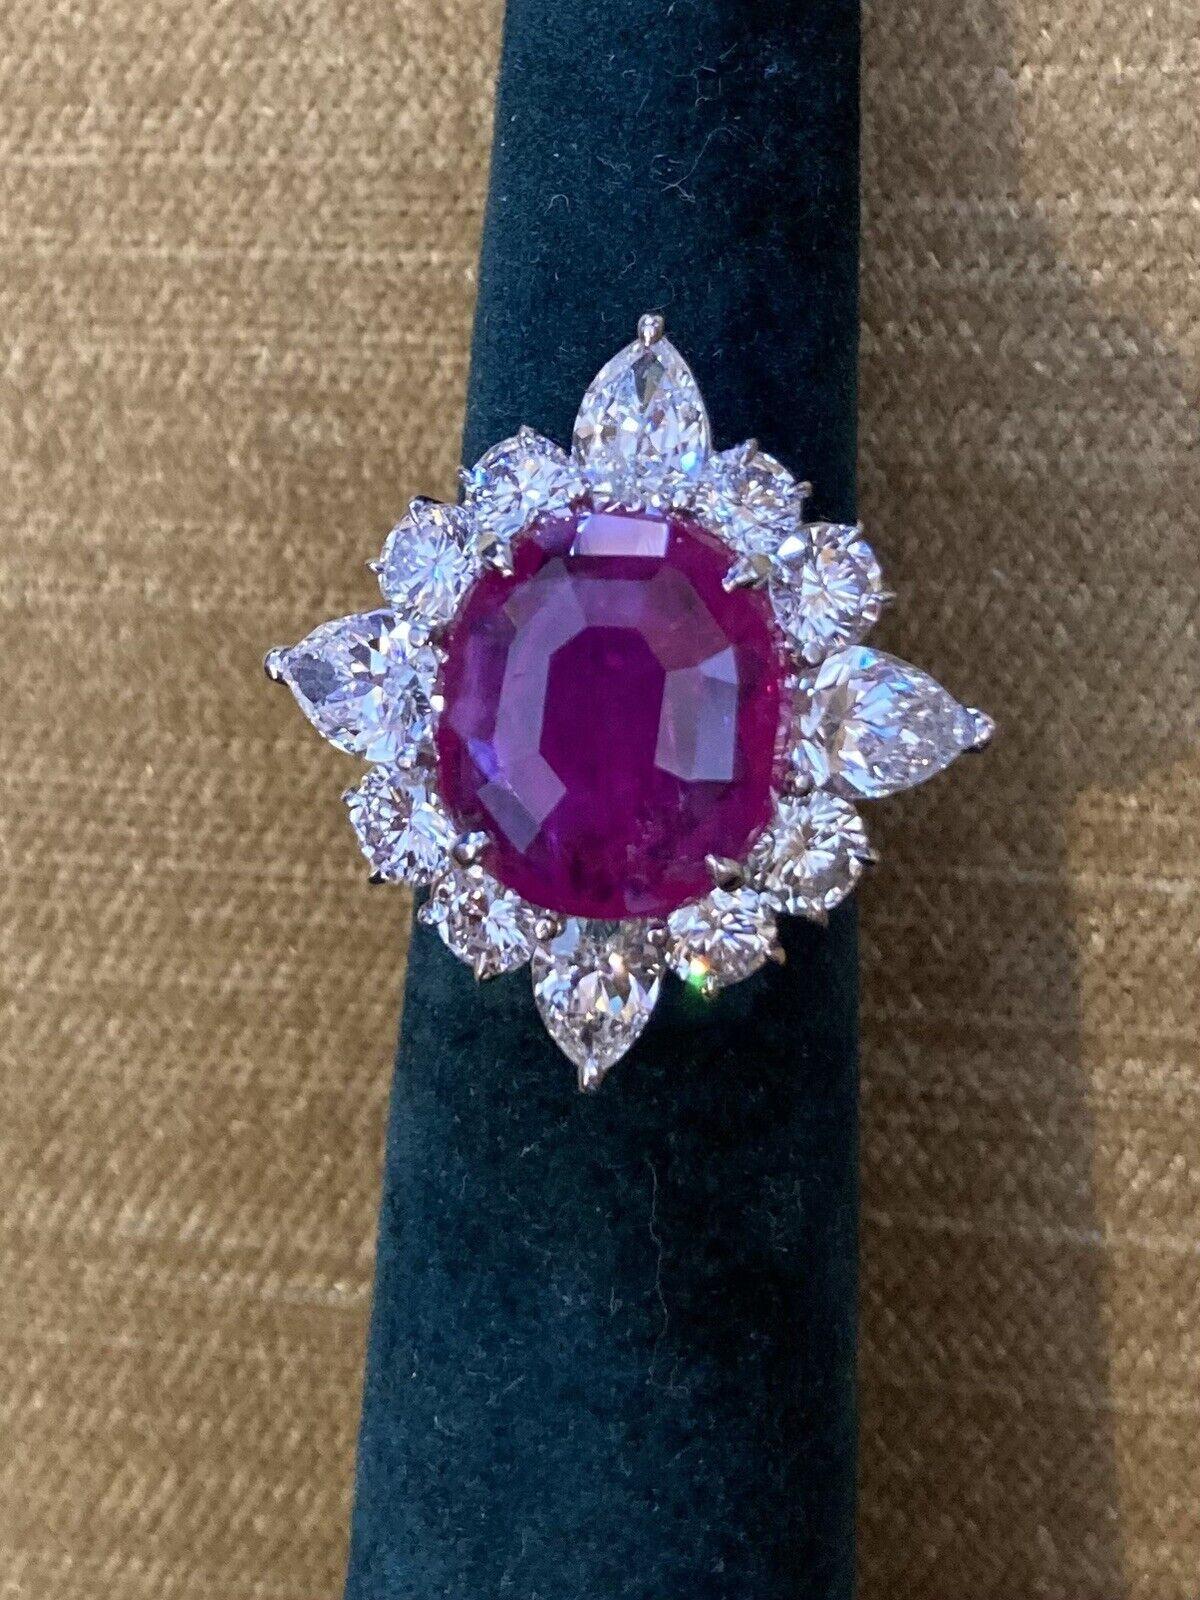 9.34 ct AGL Certified Unheated Burma Ruby Ring in Platinum Diamond Setting In Excellent Condition For Sale In La Jolla, CA